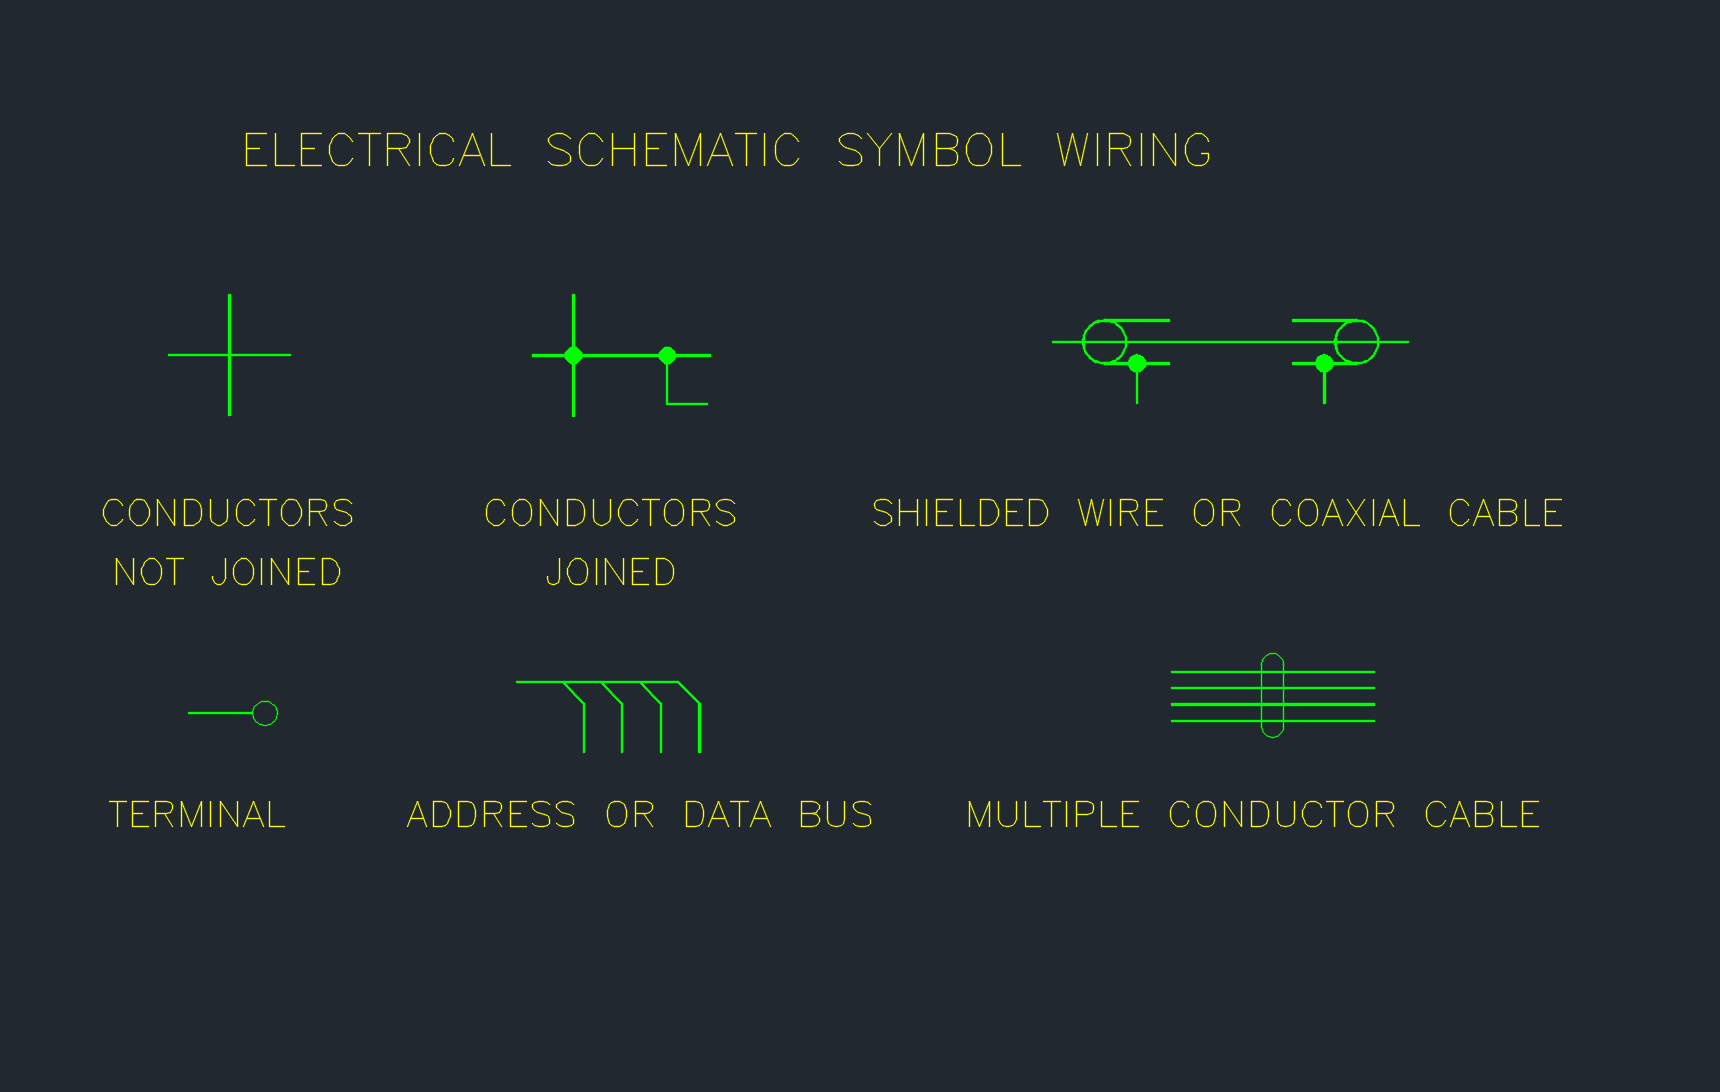 Schematic Wiring Symbols Electrical And Instrumentation Drawing